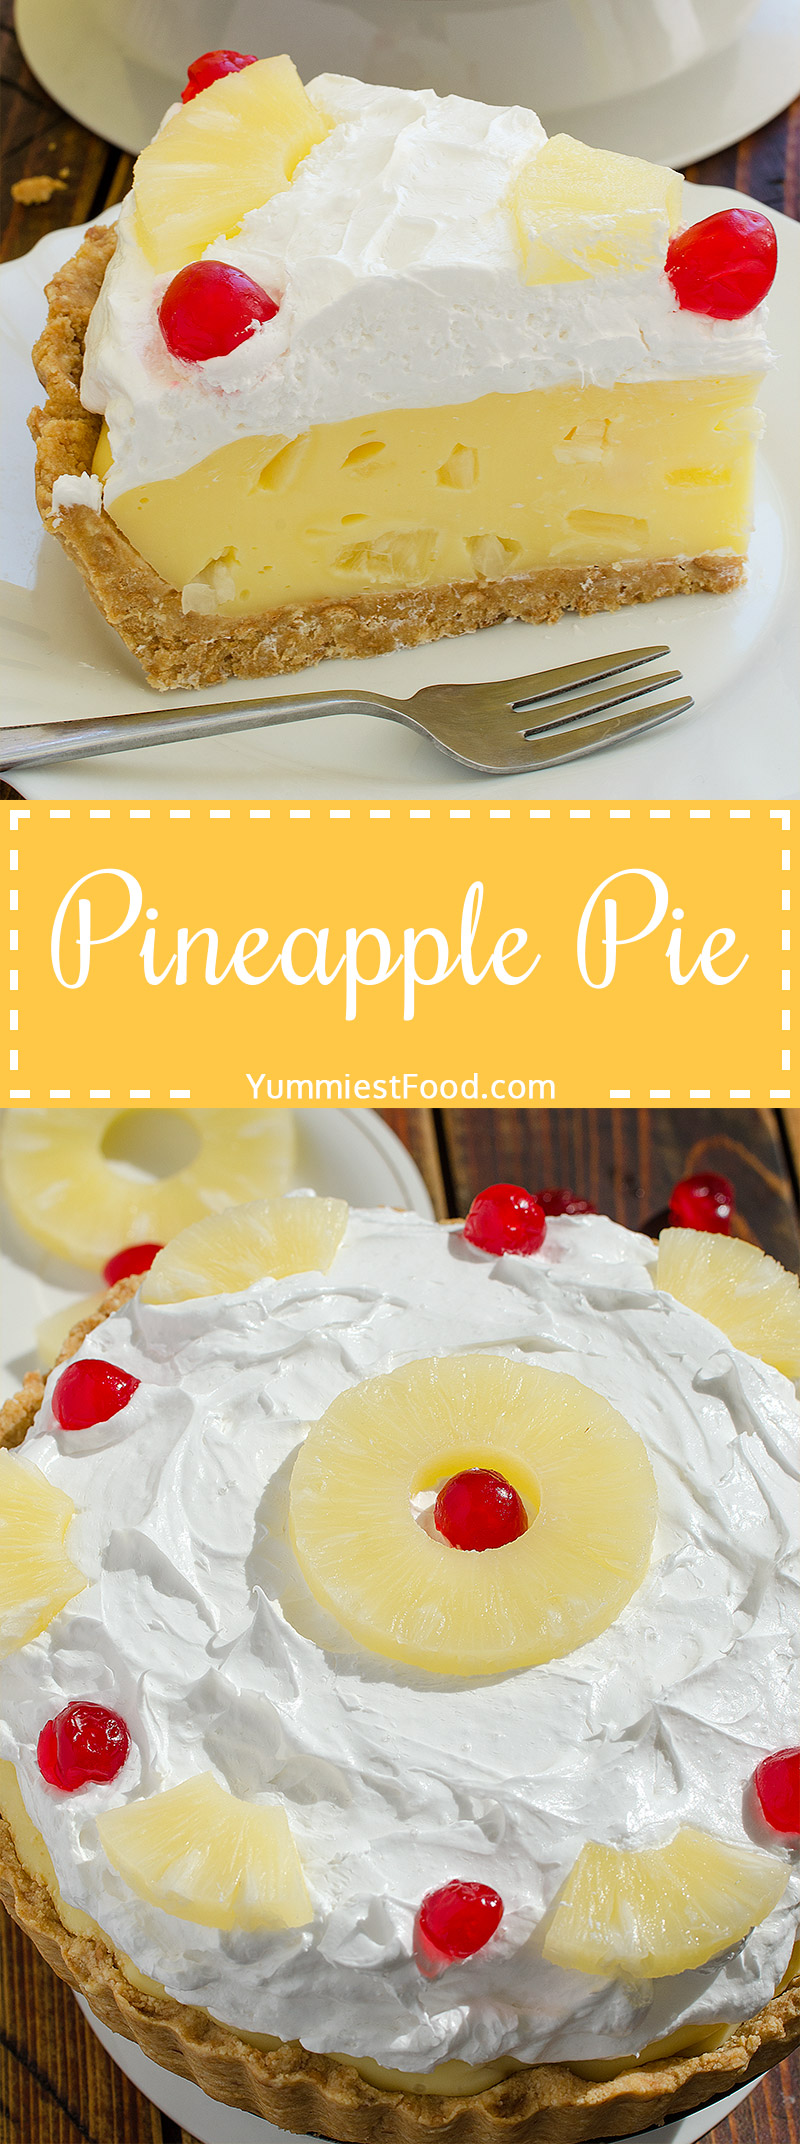 Pineapple Pie a quick recipe for creamy, refreshing and so delicious summer pie.